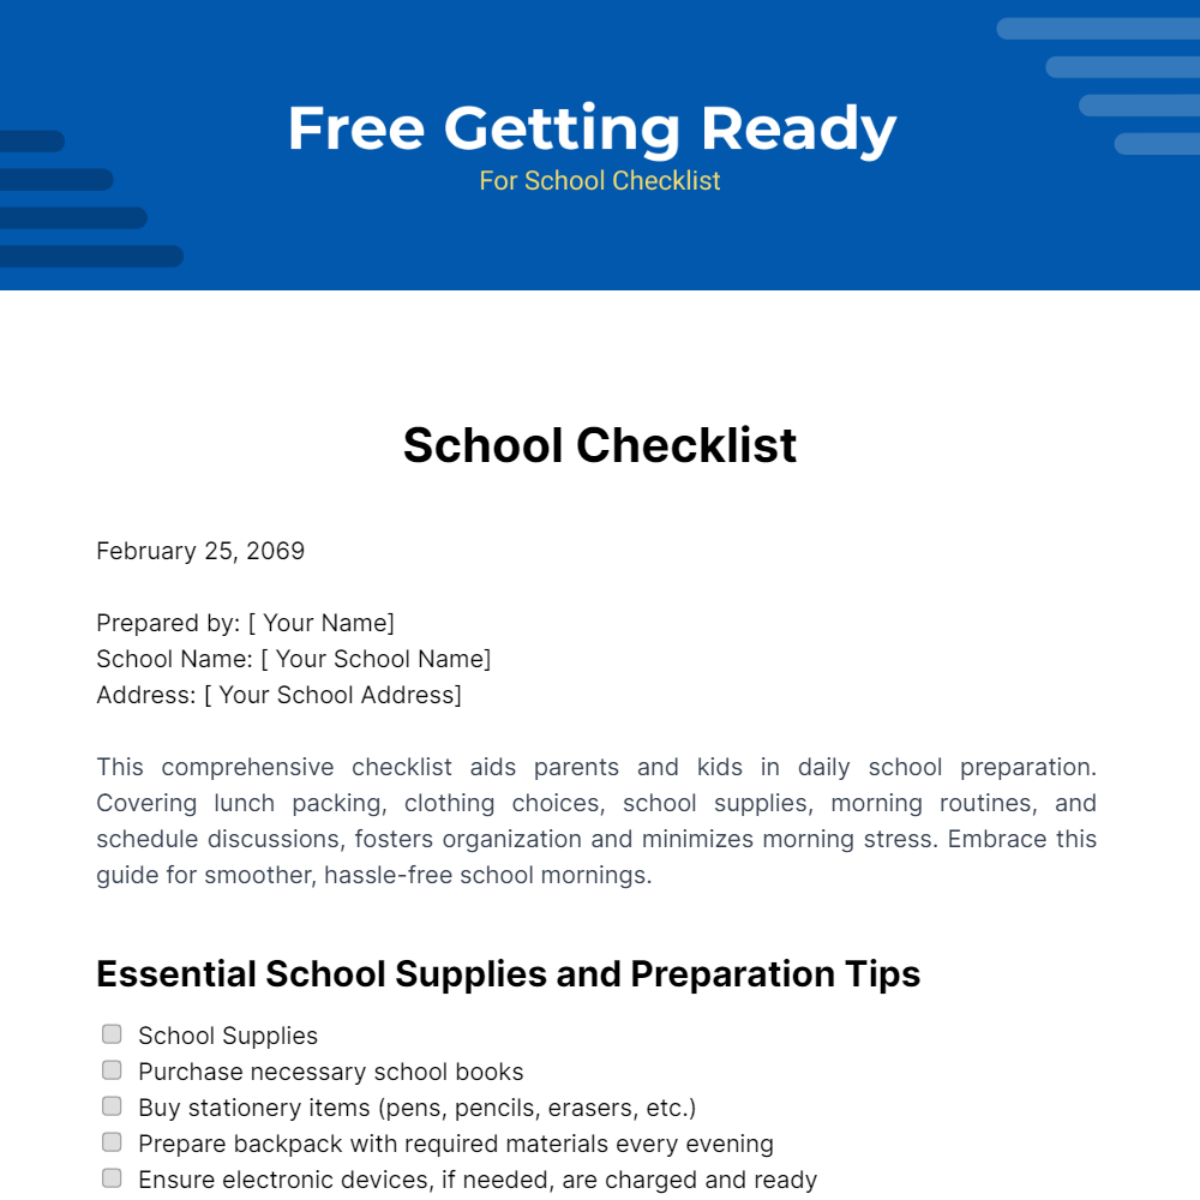 Free Getting Ready for School Checklist Template